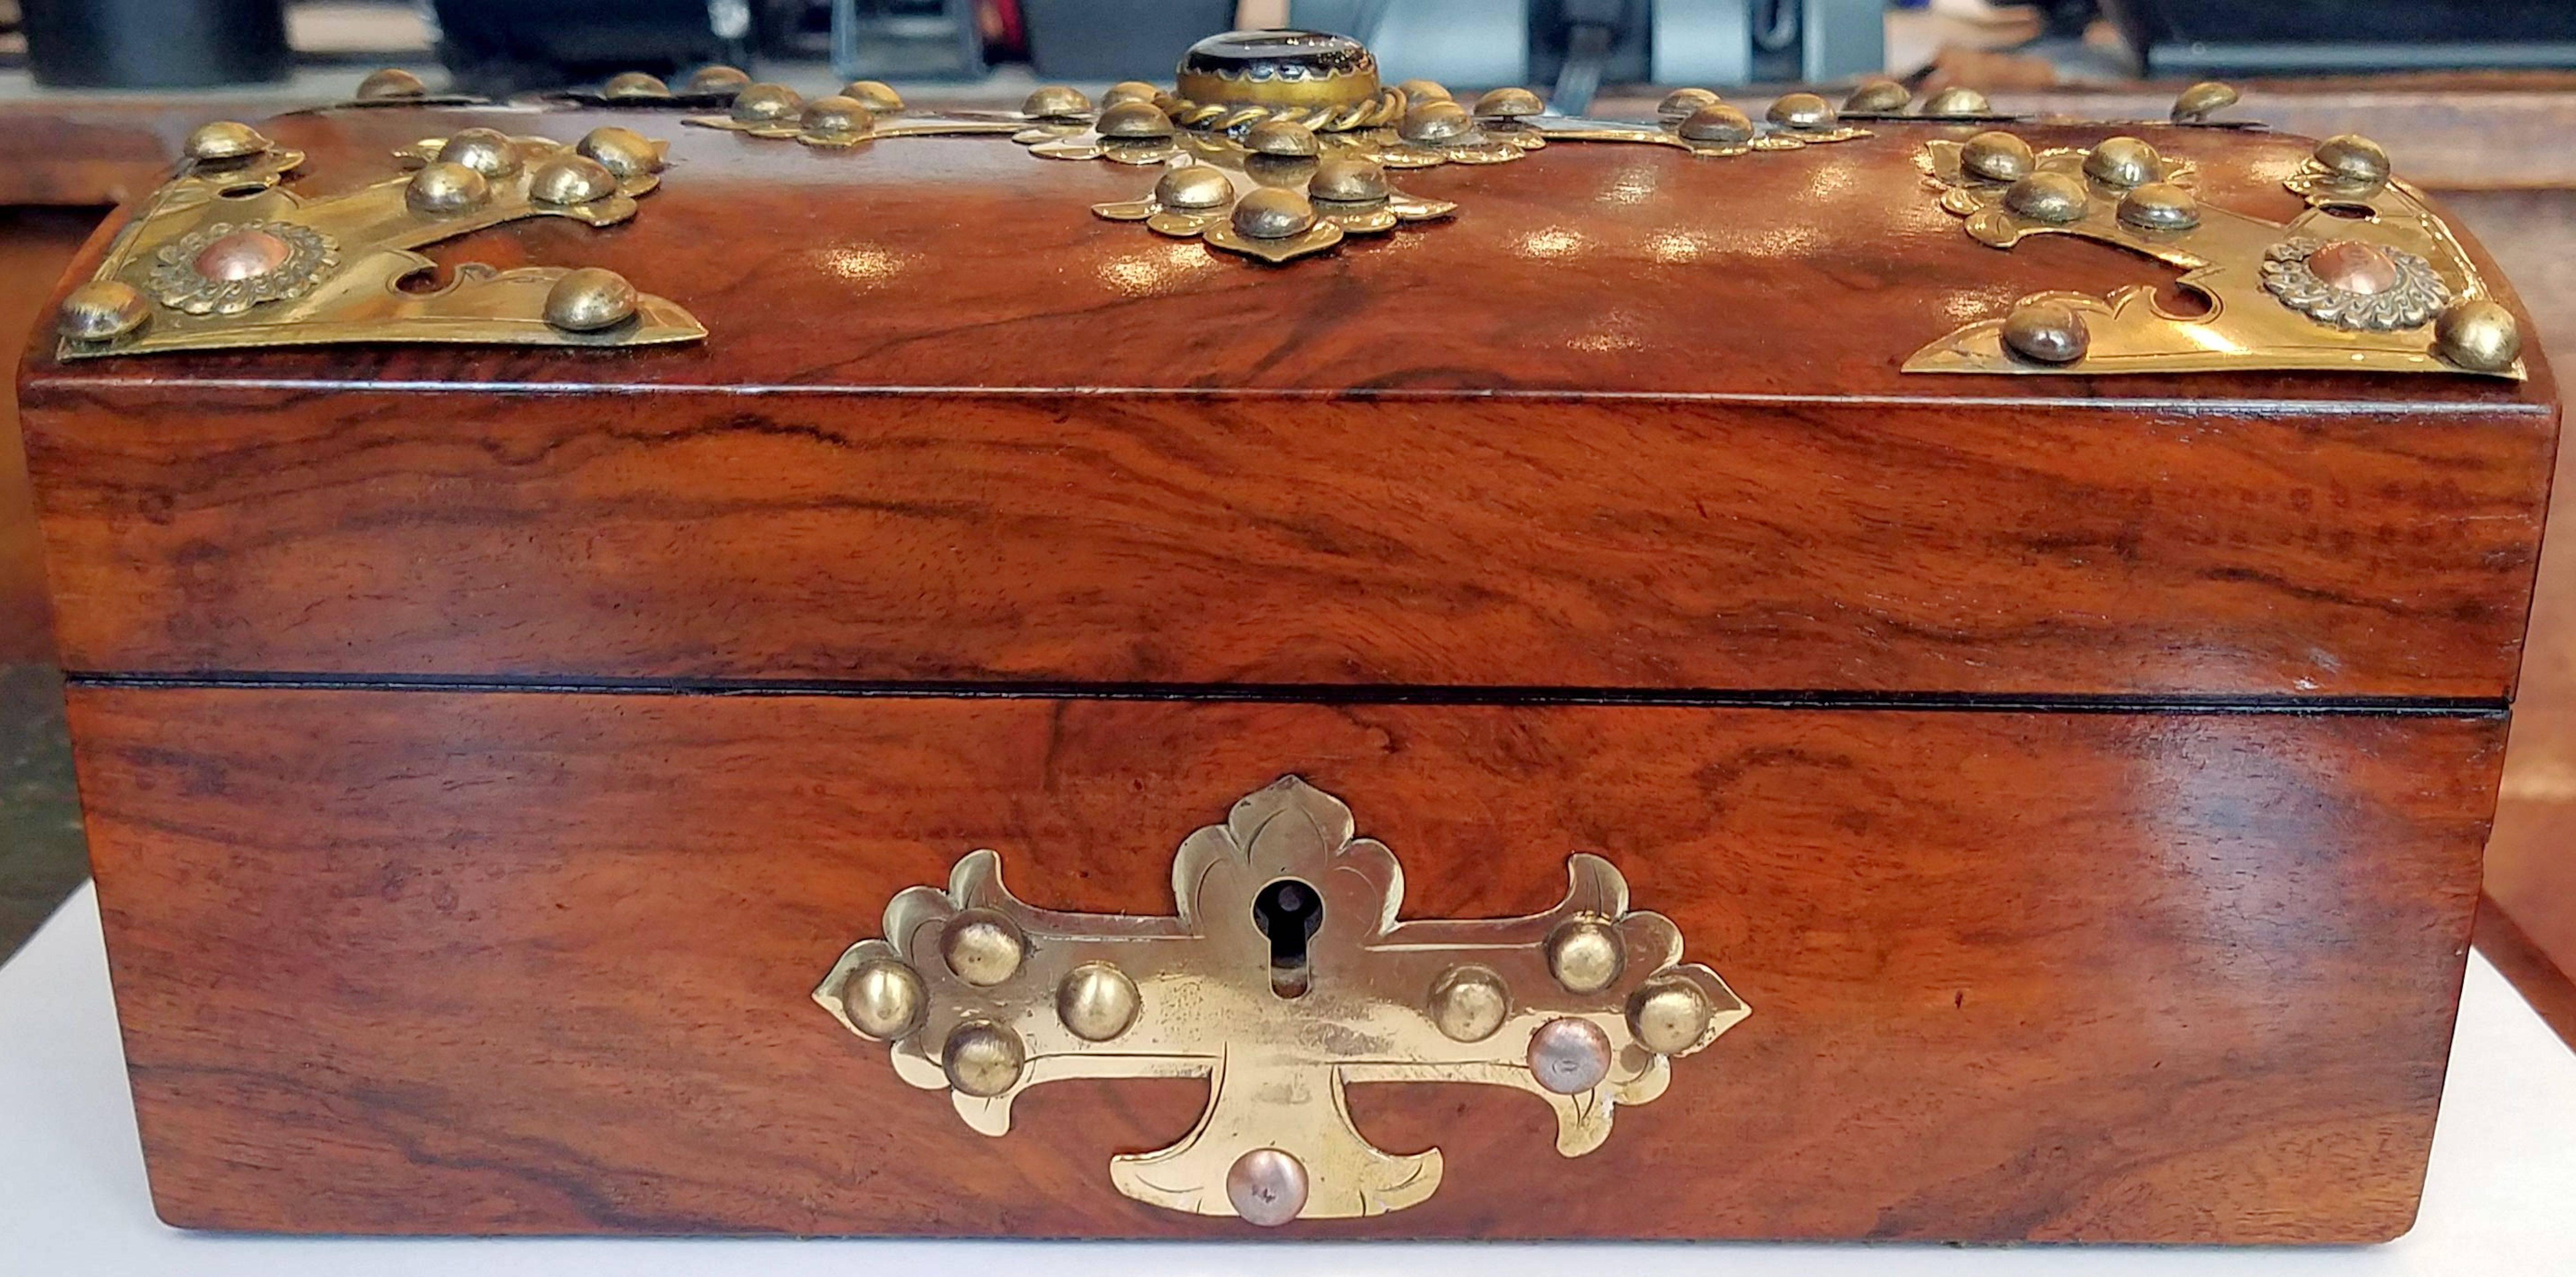 Antique black walnut jewel box with brass mounts and banded agate.